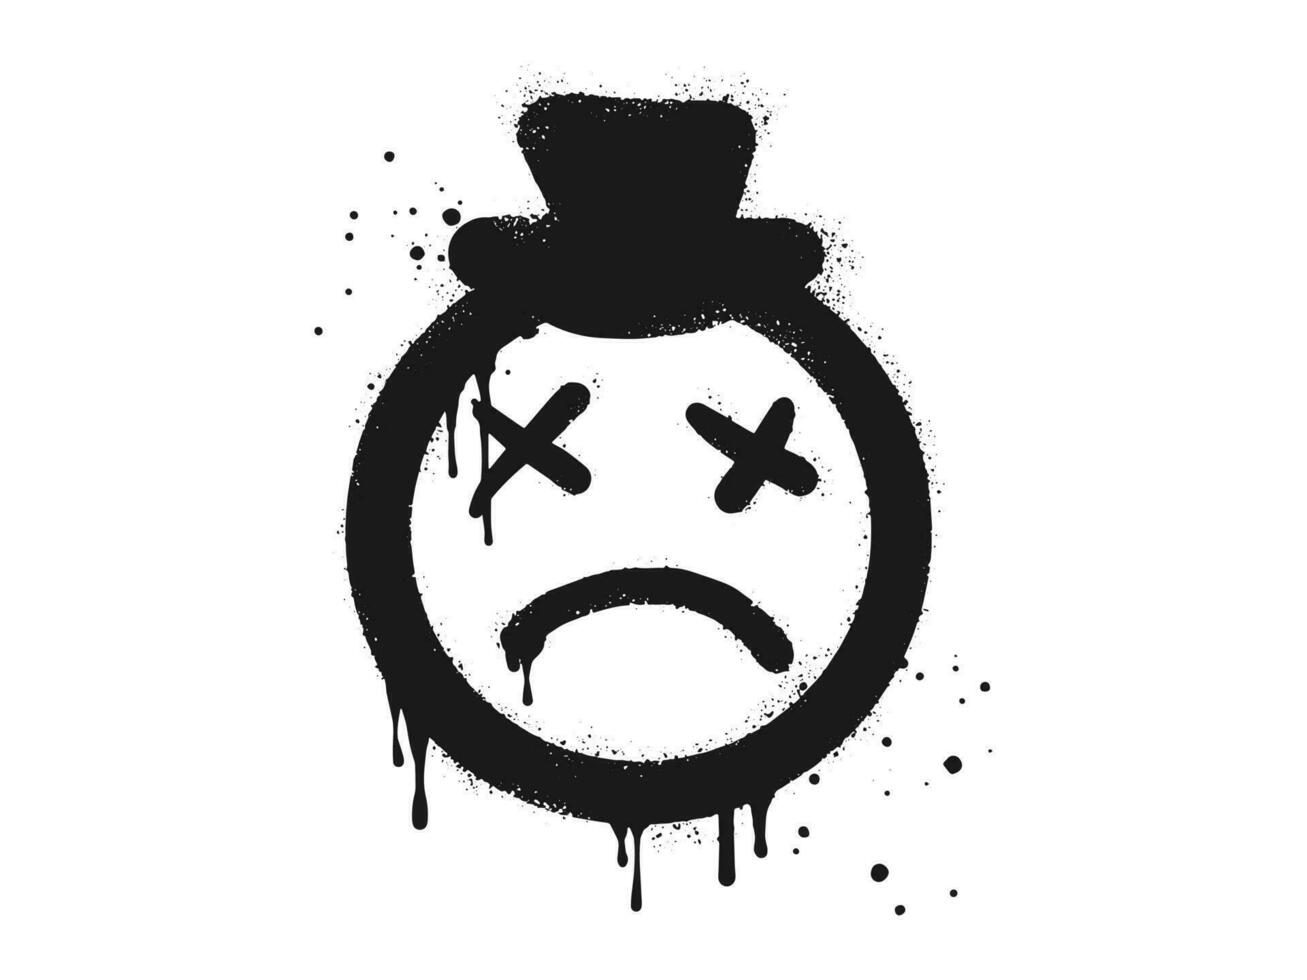 Scary sick face emoticon character with hat. Spray painted graffiti Sad face in black over white. isolated on white background. vector illustration